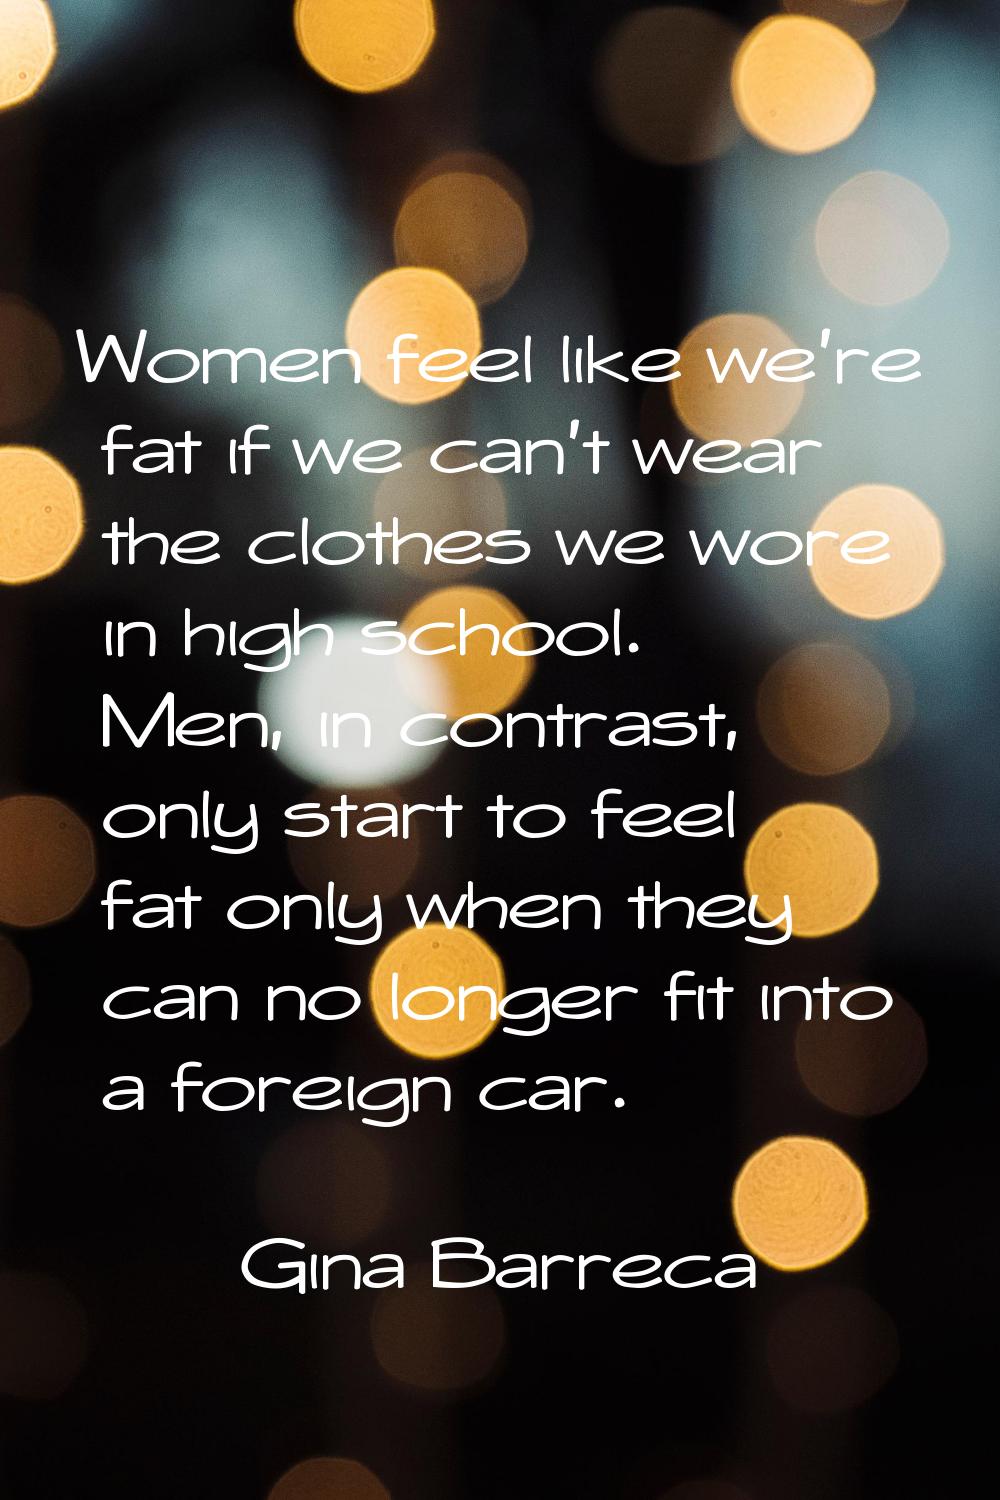 Women feel like we're fat if we can't wear the clothes we wore in high school. Men, in contrast, on